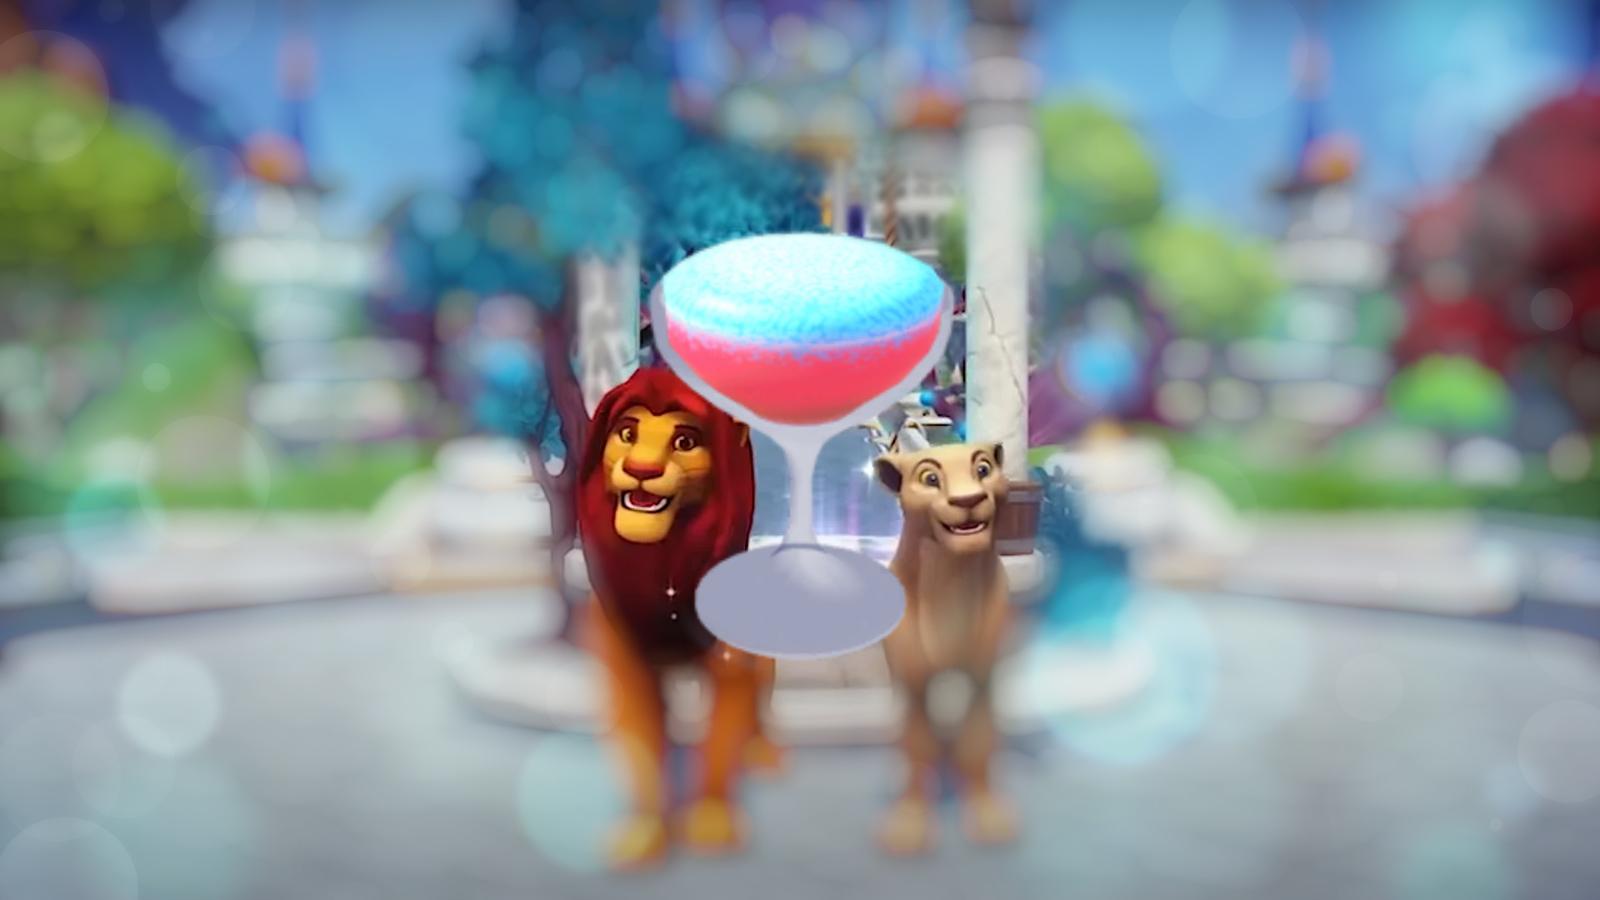 Dream Fizz with Simba and Nala from Disney Dreamlight Valley smiling